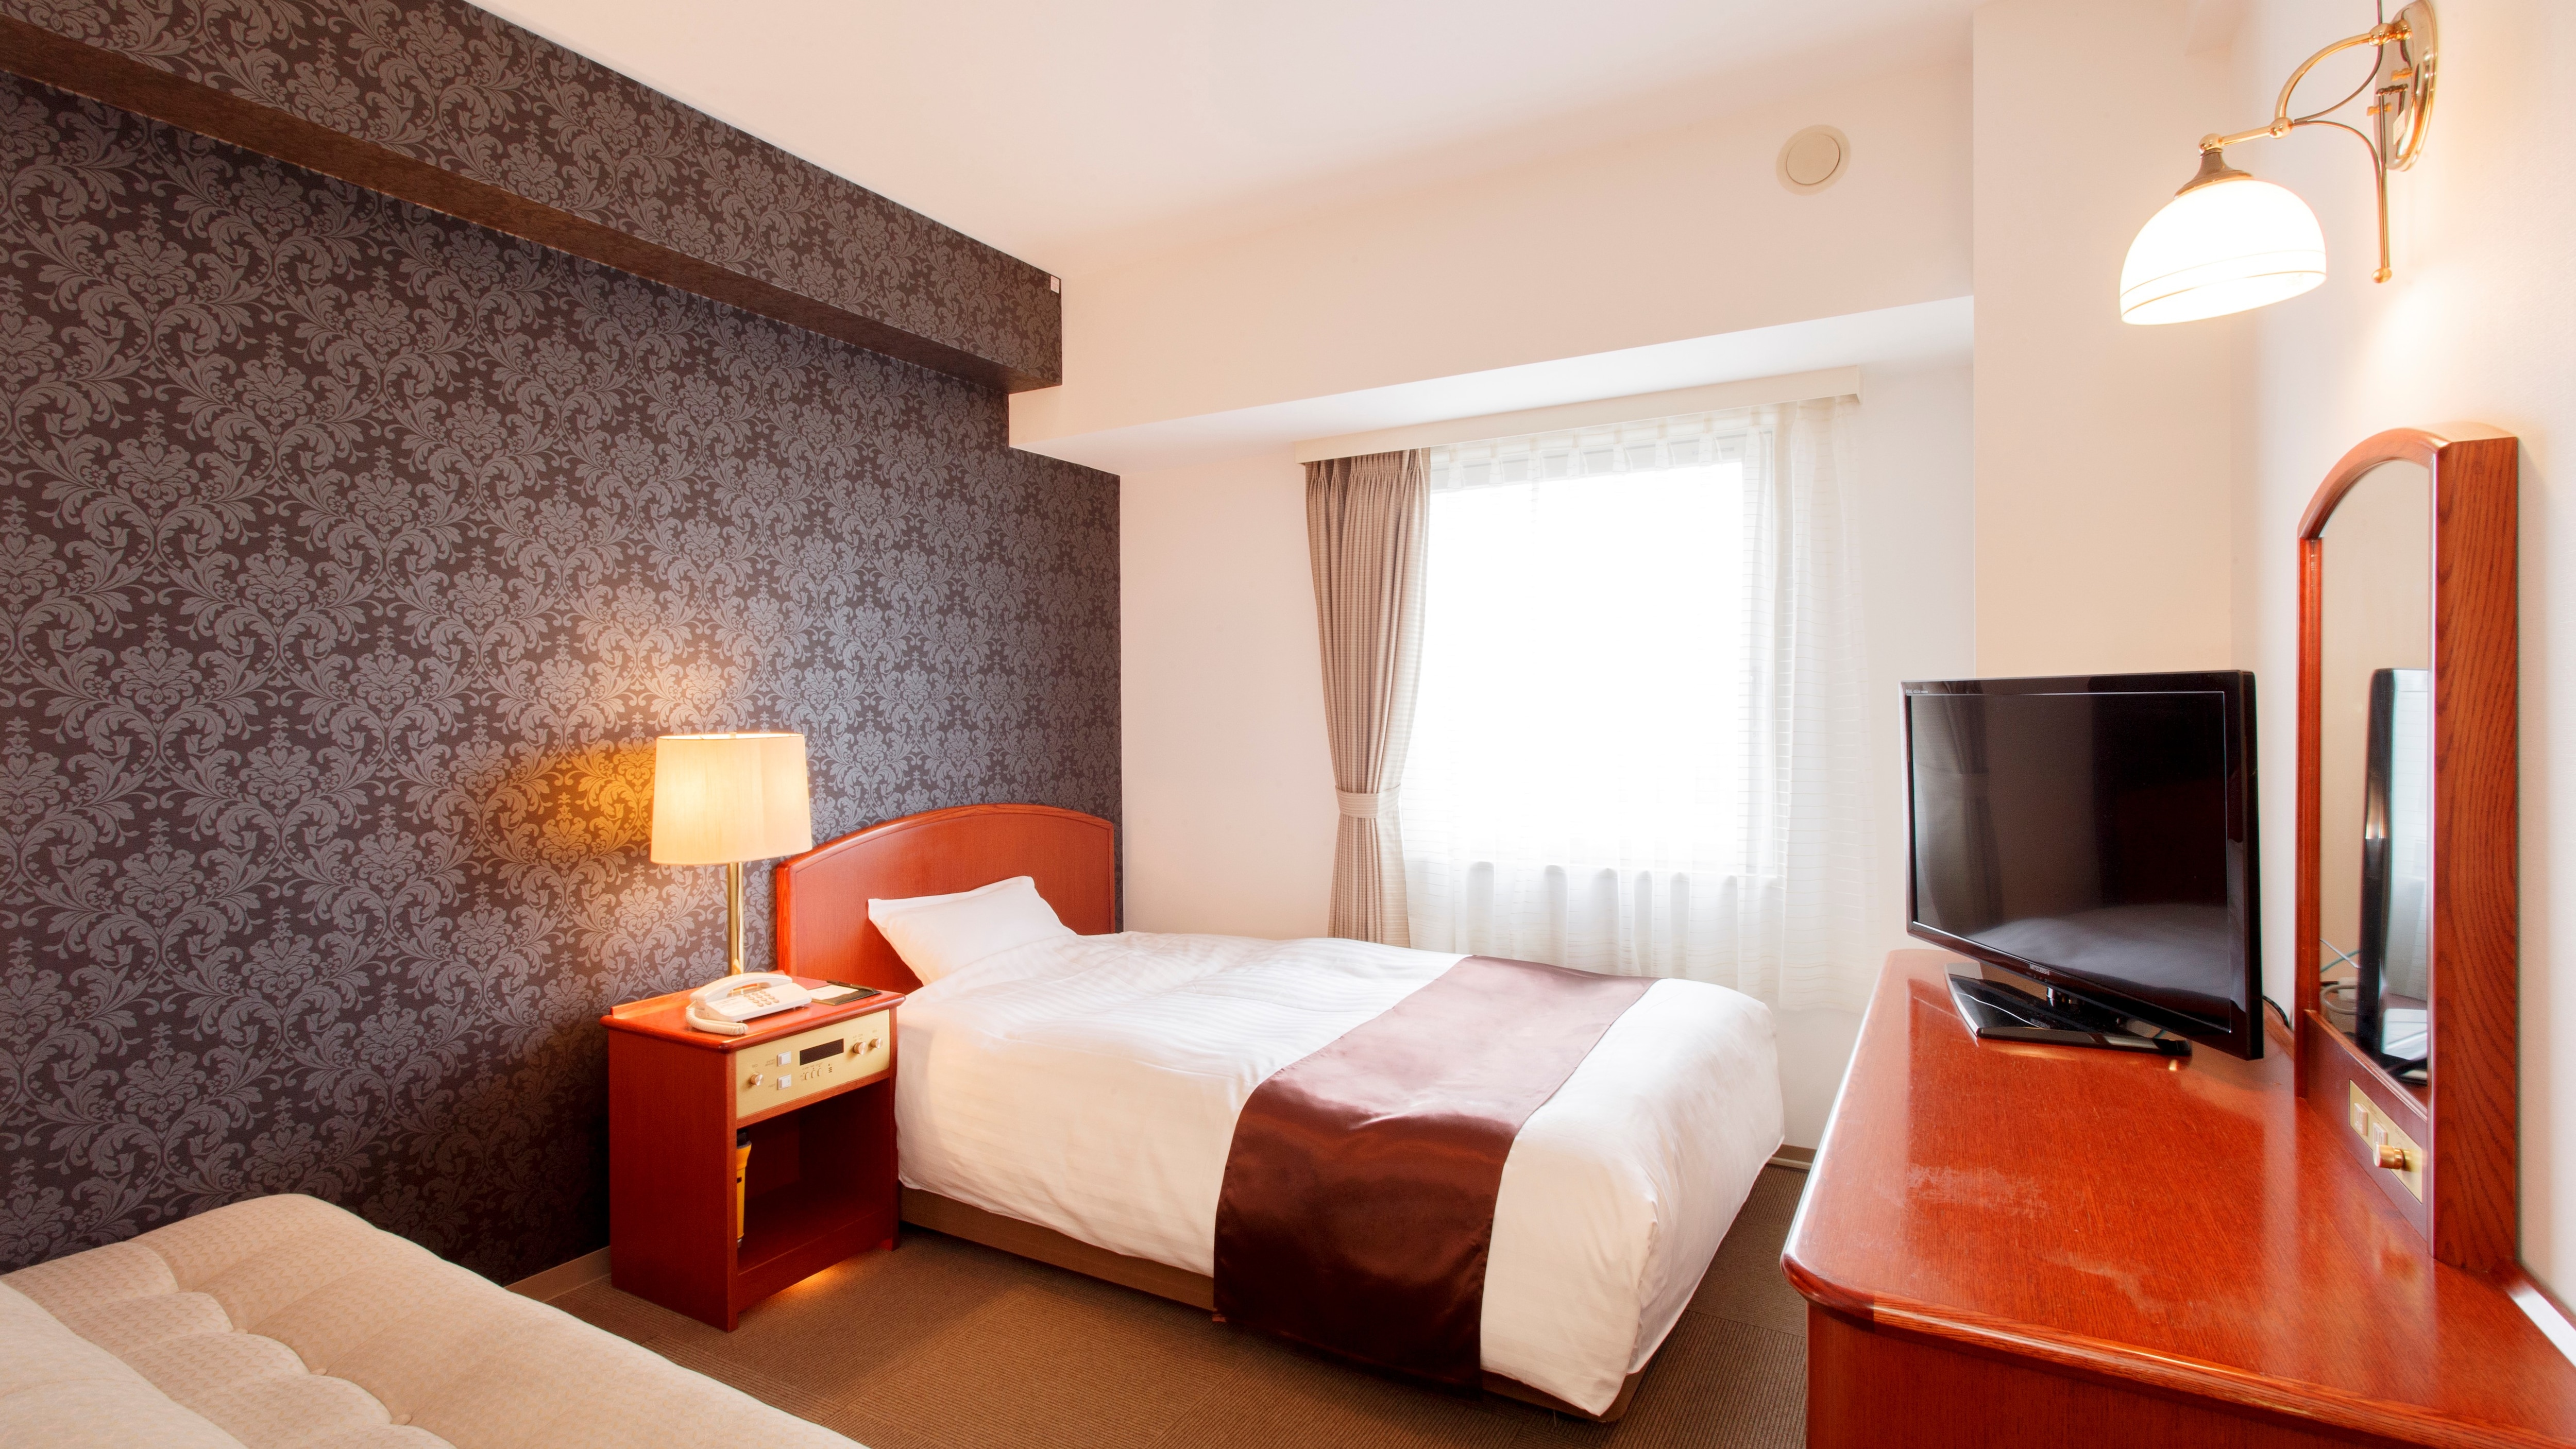 Single room. With relaxation first, all semi-double beds are used.